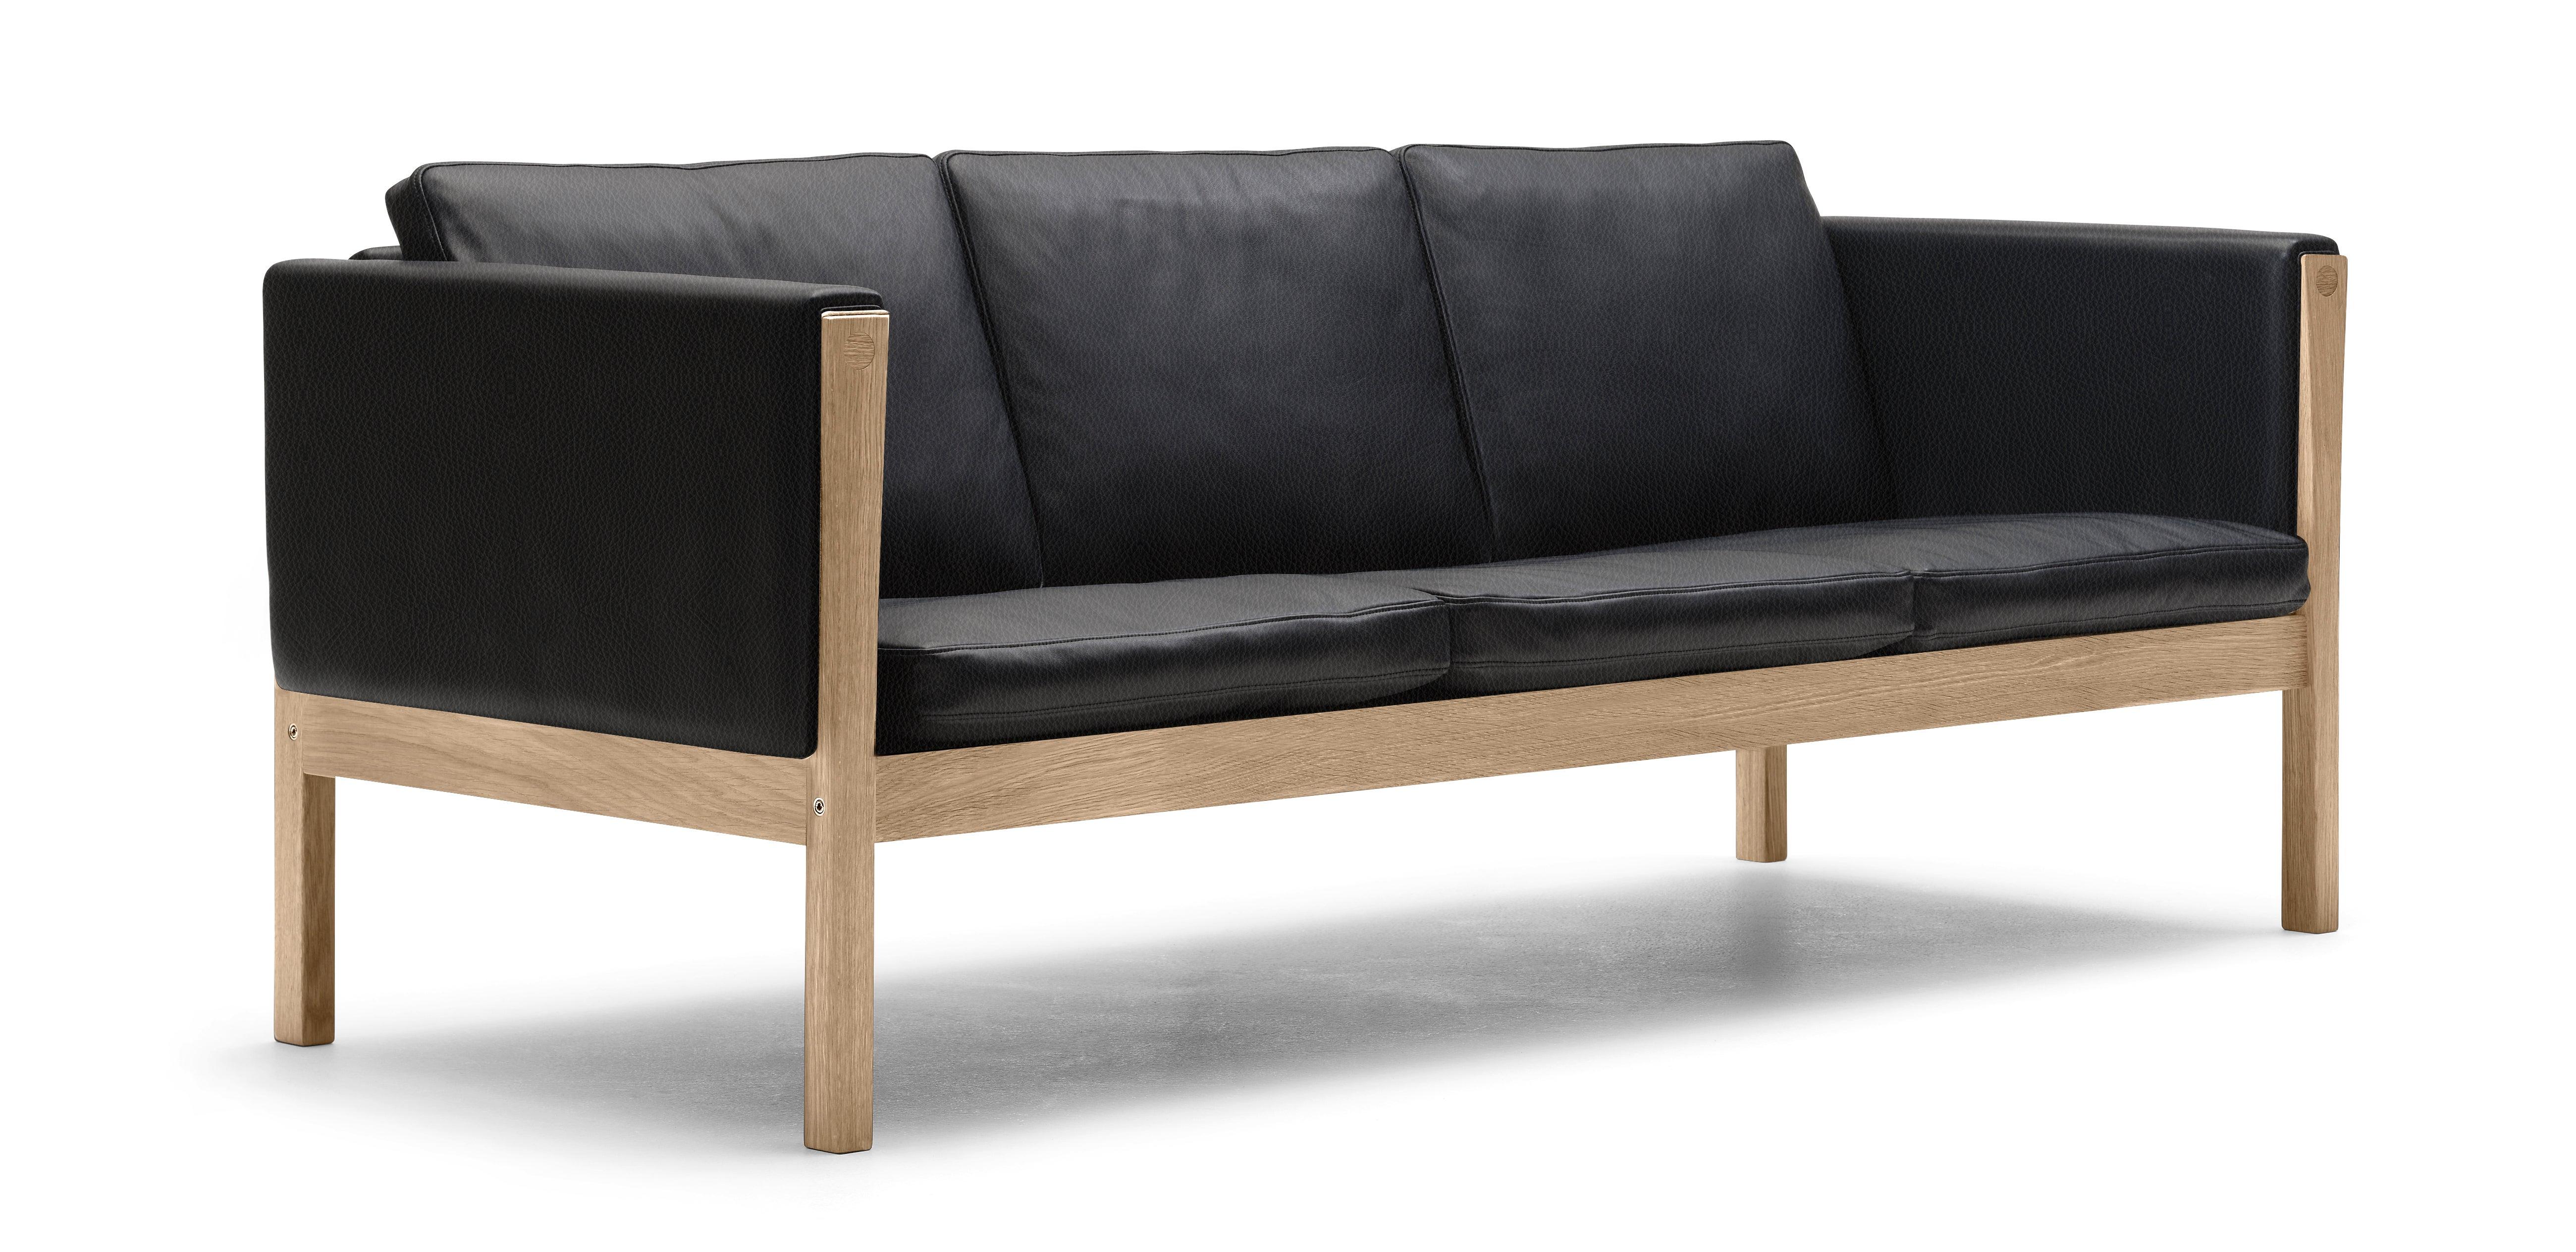 Hans J. Wegner designed the CH163 sofa in 1965, using a down filling for luxurious comfort. This large, three-seat sofa neatly exemplifies how Wegner often highlighted structural details to great effect. The lead image is for oiled oak is Thor 301